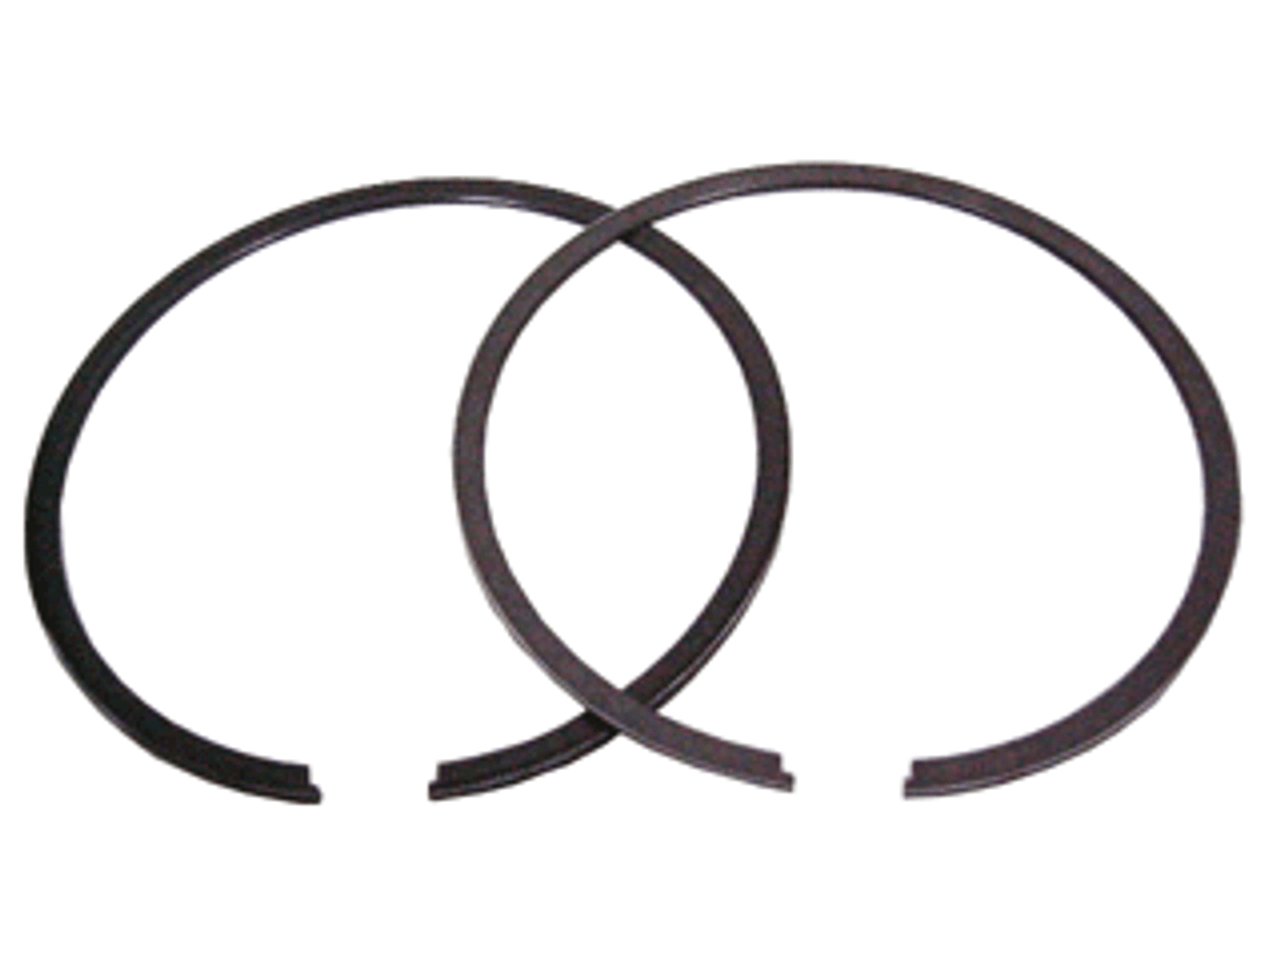 Sp1 New Piston Ring Set, 54-728RS